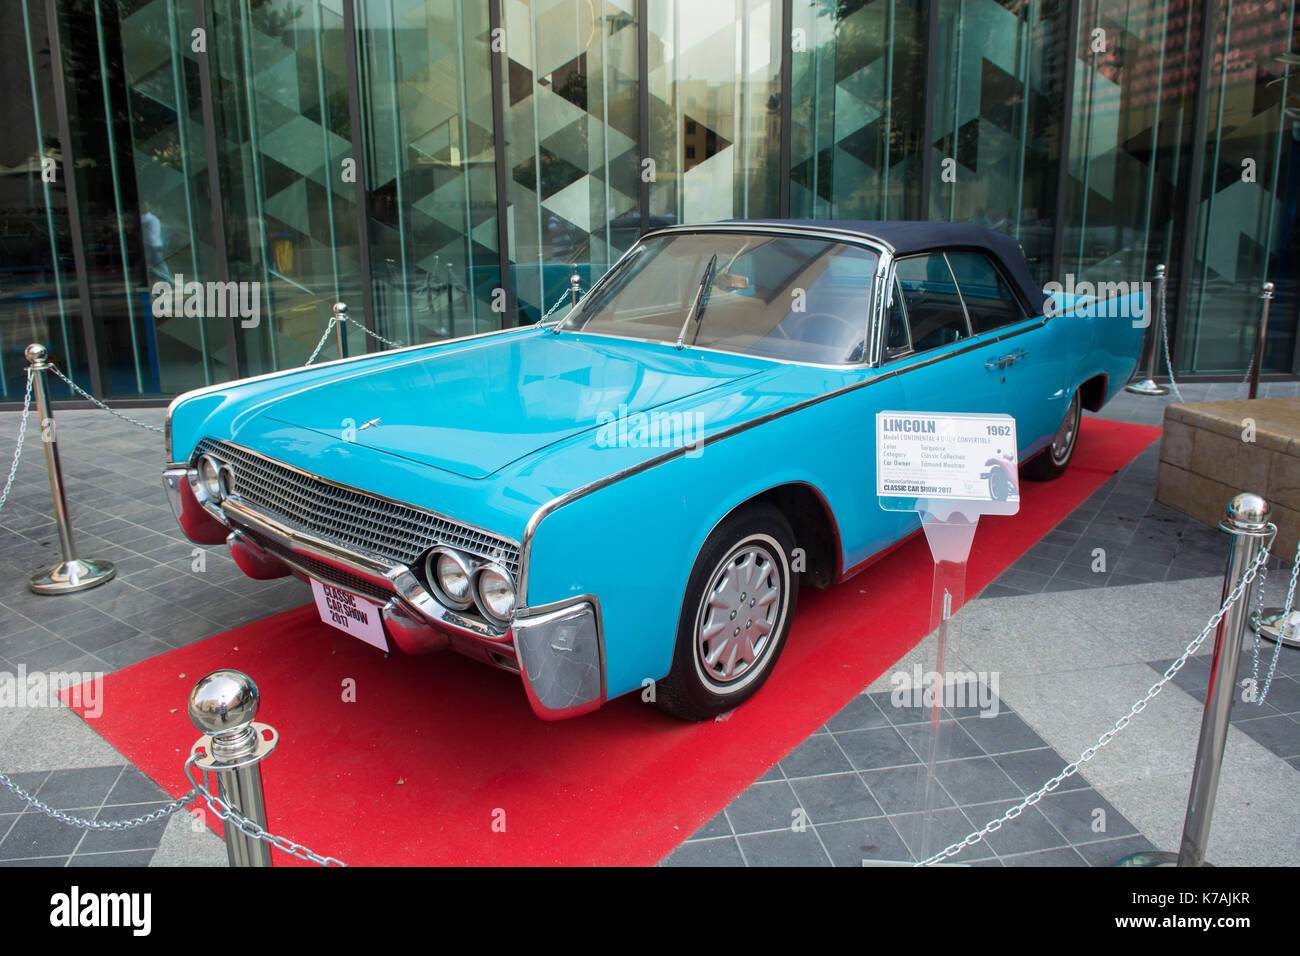 Beirut, Lebanon. 15th Sep, 2017. 1962 Lincoln 4 door convertible on Display at the Classic car show in Beirut Souks, Beirut Lebanon Credit: Mohamad Itani/Alamy Live News Stock Photo